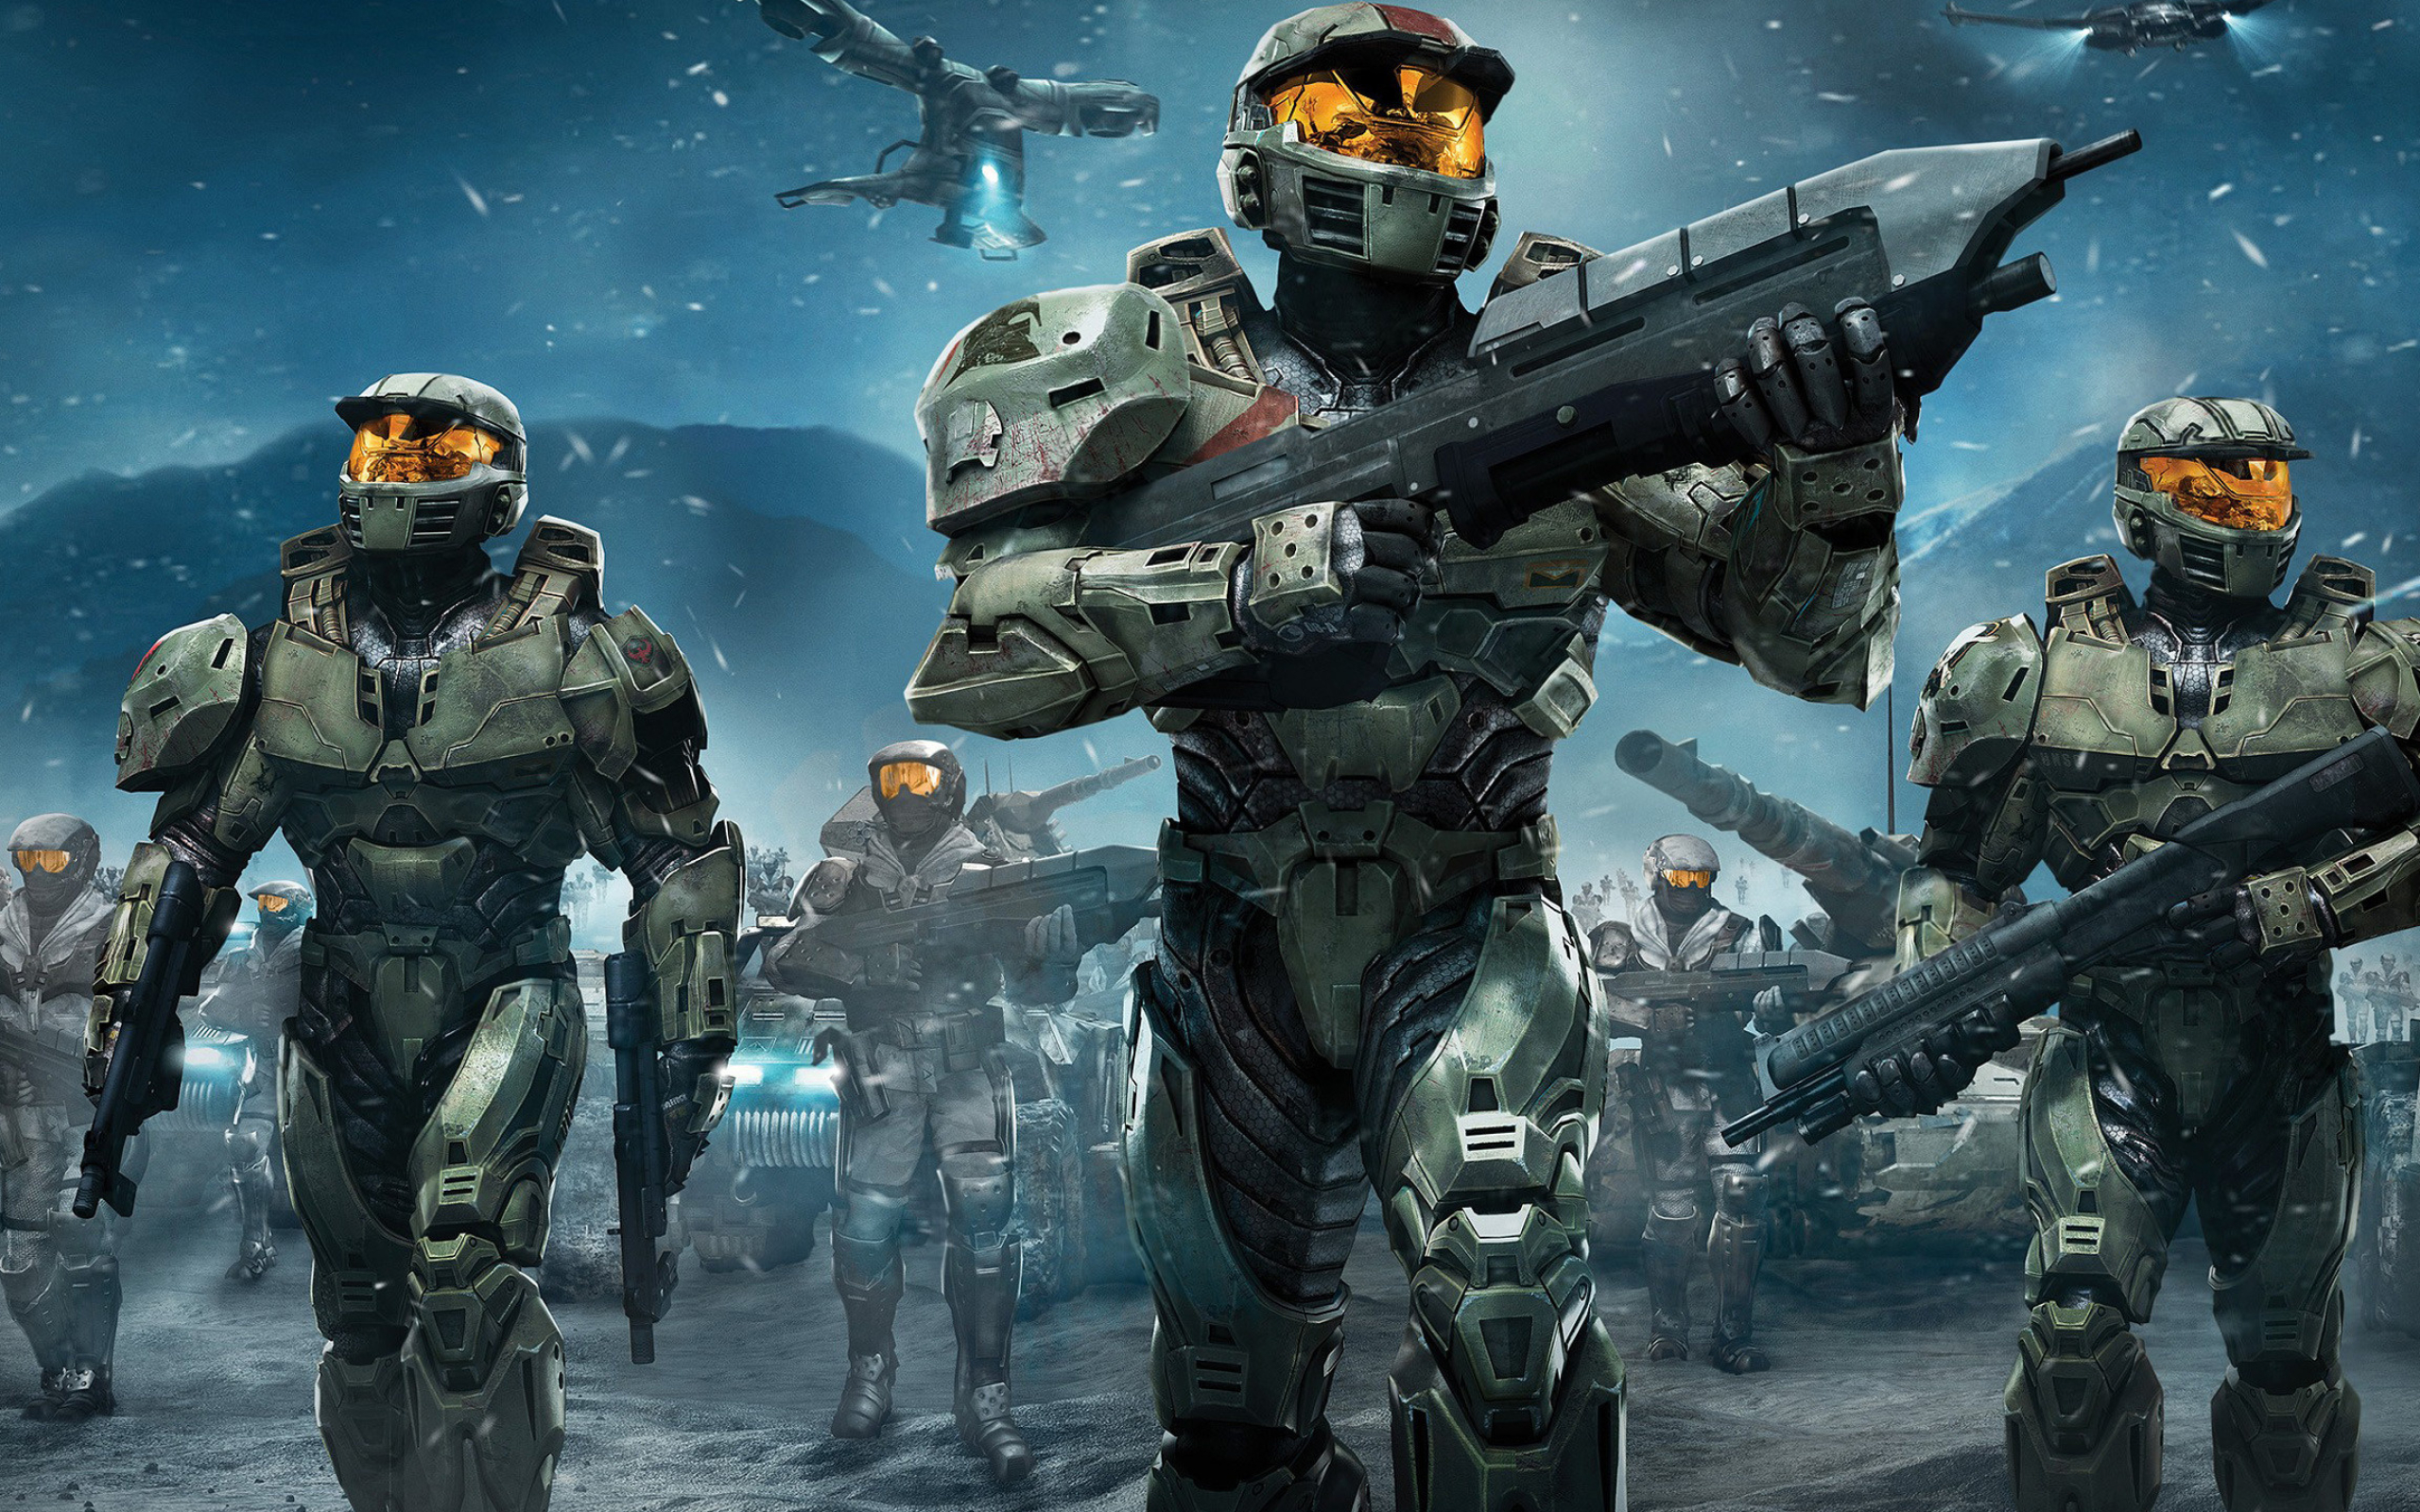 Halo Wars, Eye-catching wallpapers, Gaming masterpiece, Unforgettable imagery, 2560x1600 HD Desktop